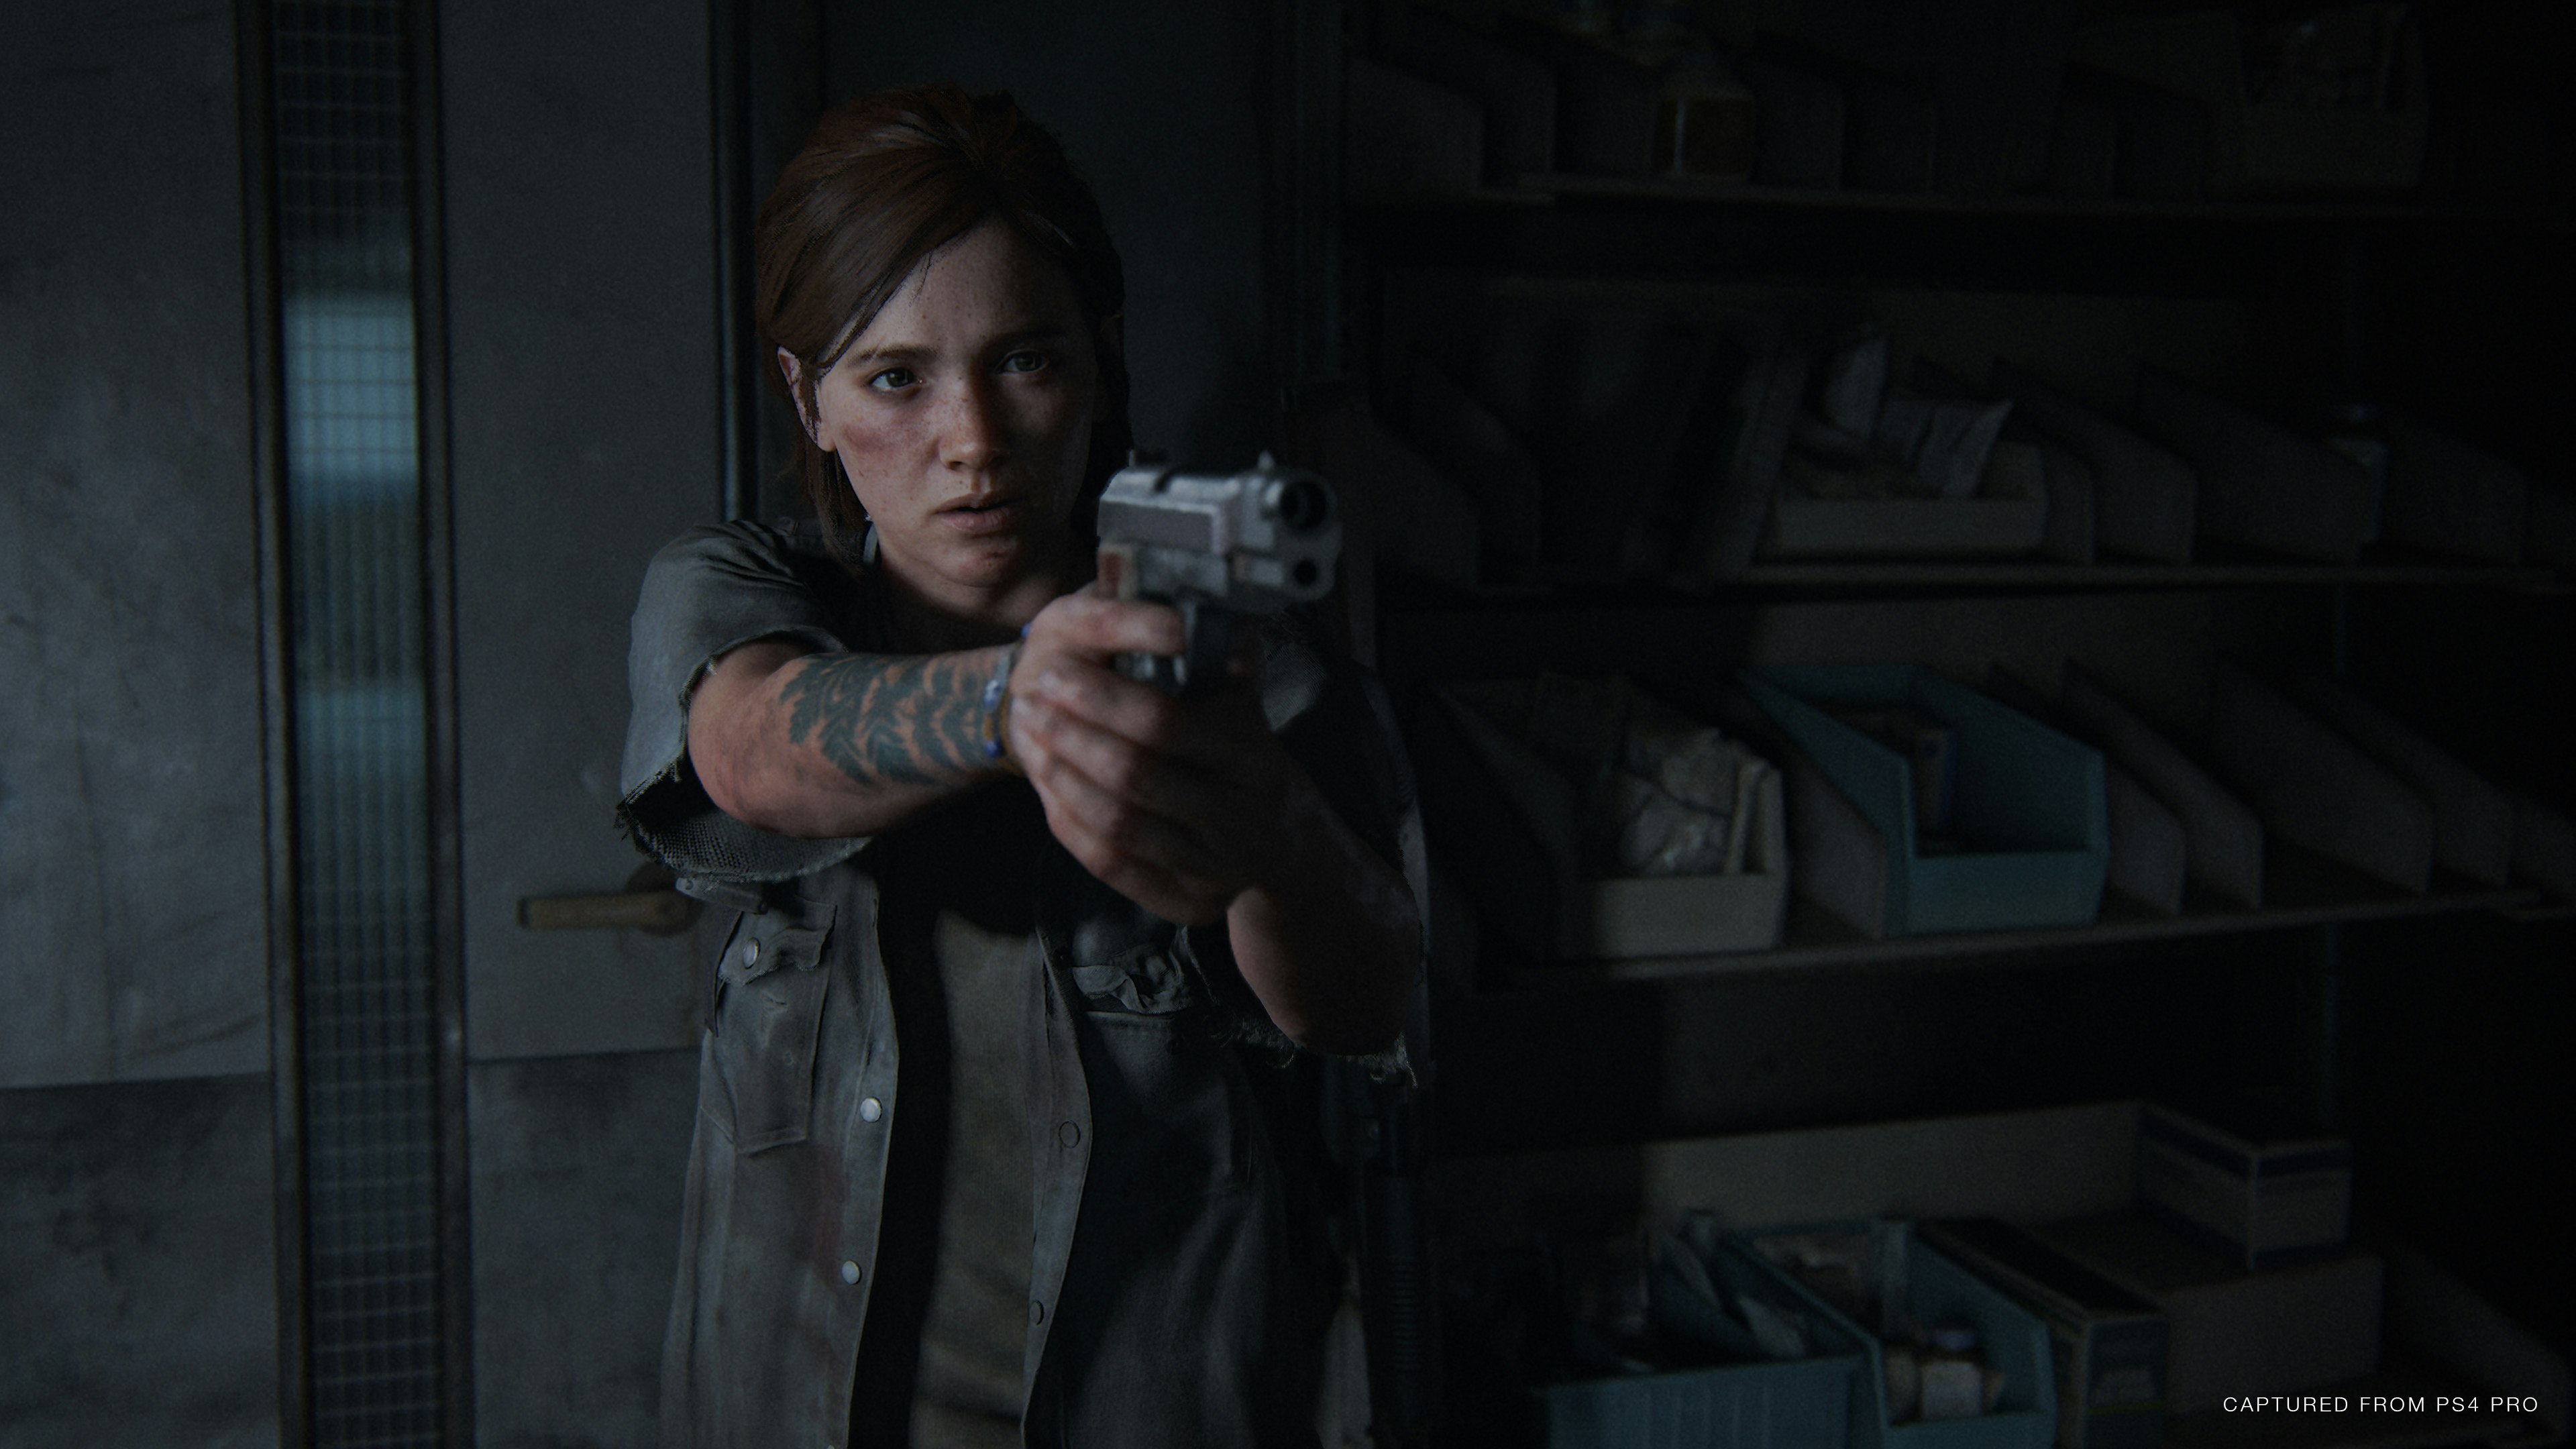 The Last of Us: Part II, Contributed To By Original Force, Exceeds